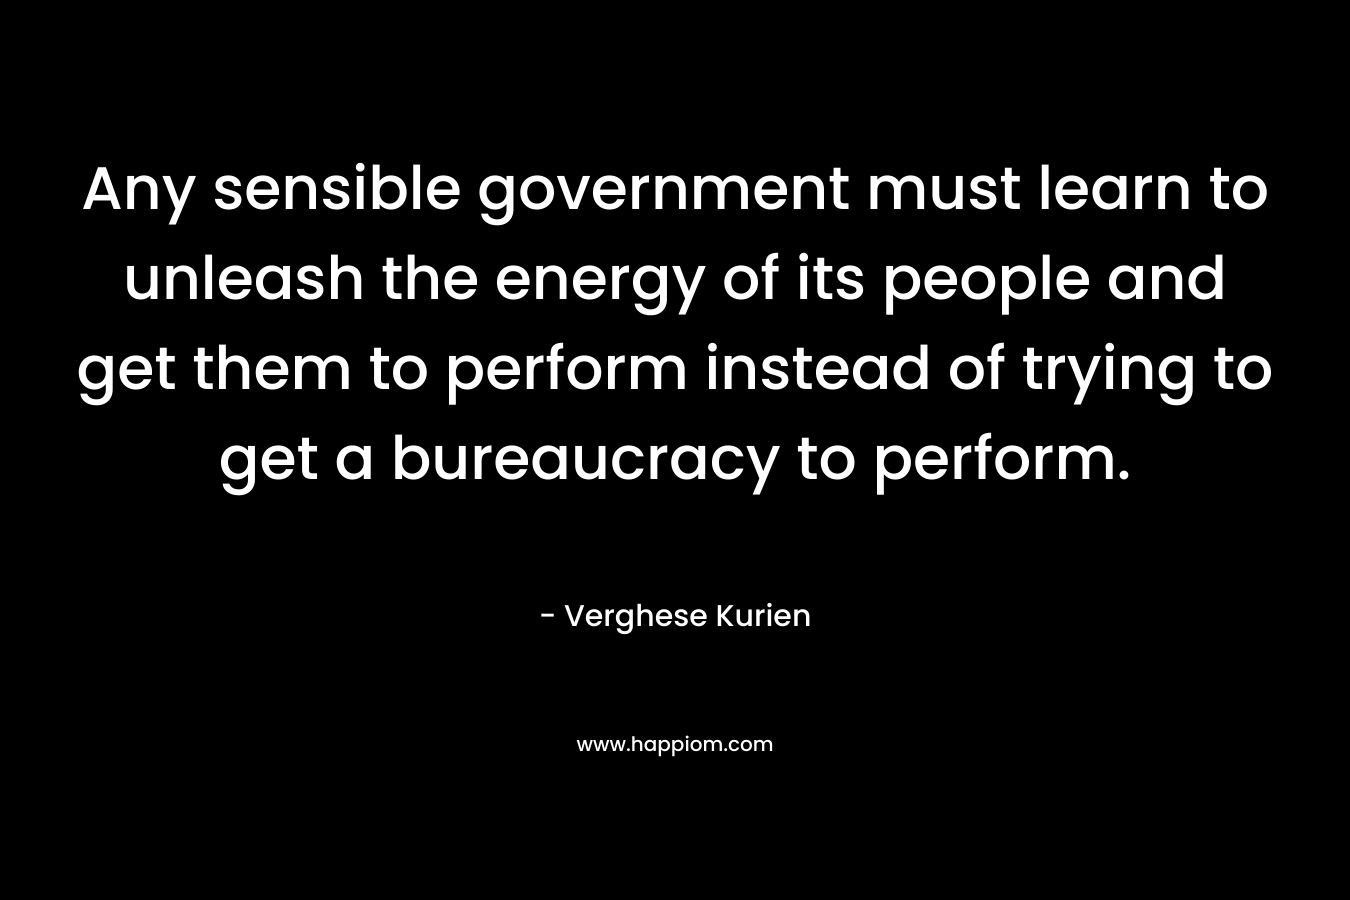 Any sensible government must learn to unleash the energy of its people and get them to perform instead of trying to get a bureaucracy to perform. – Verghese Kurien